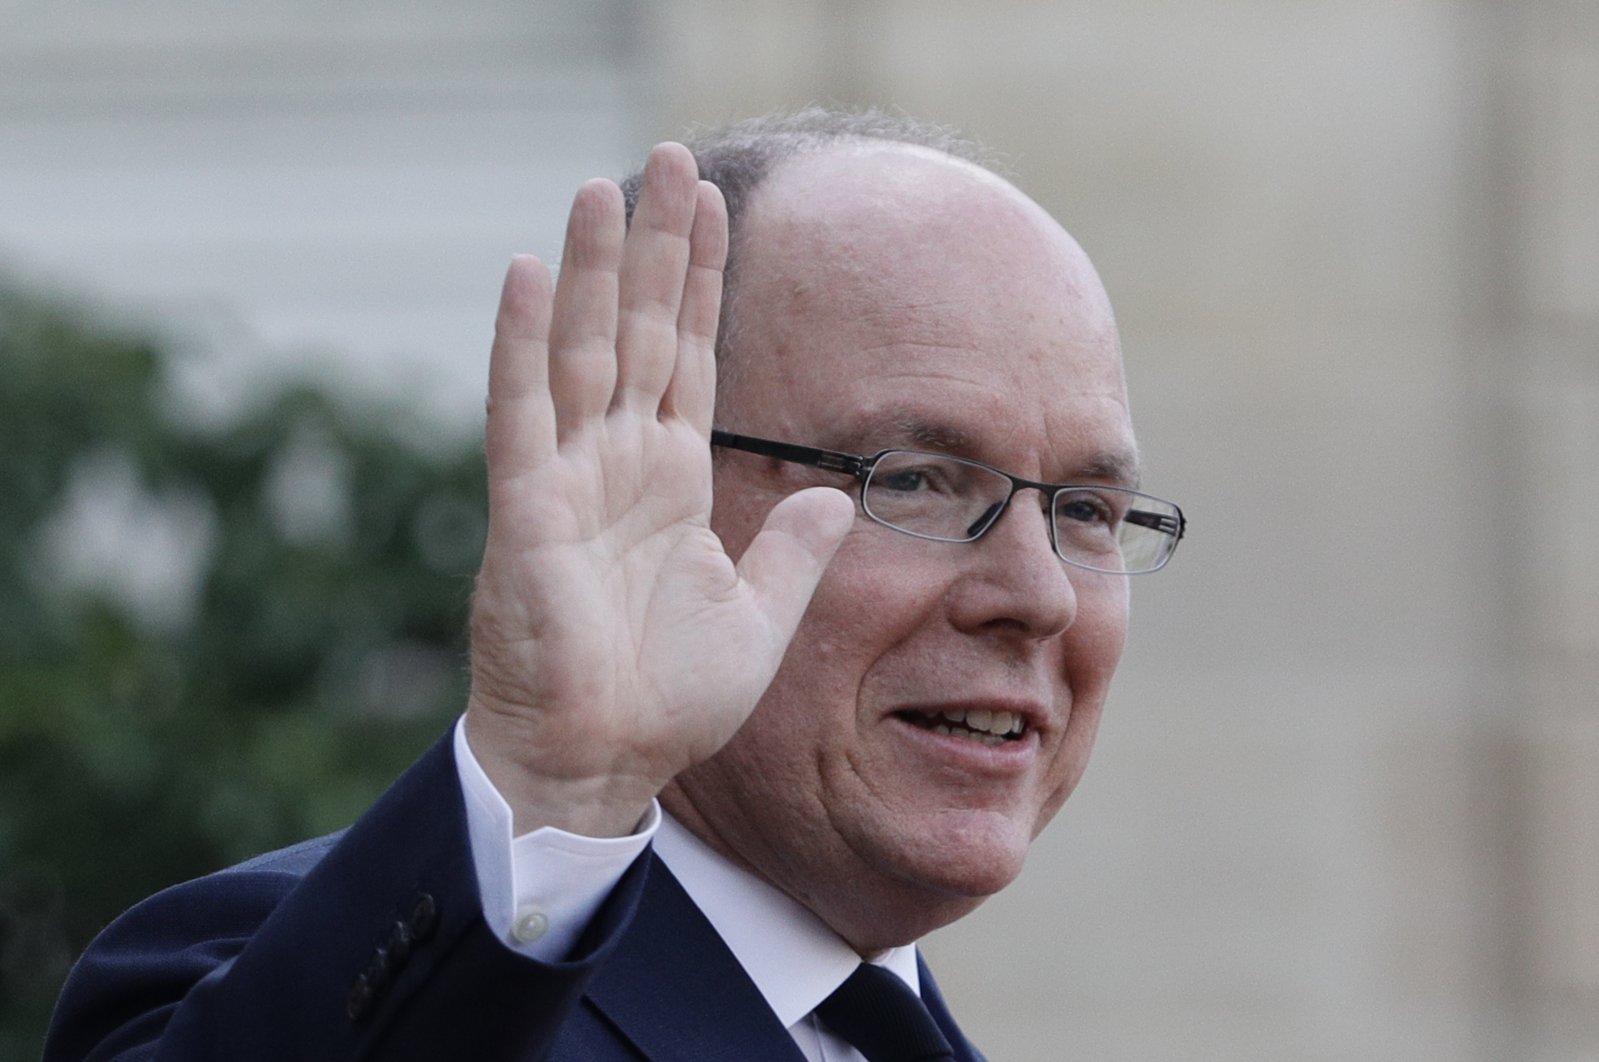 In this Sept. 30, 2019 file photo, Prince Albert of Monaco leaves the Elysee Palace after a lunch with heads of states and officials, in Paris. (AP Photo)